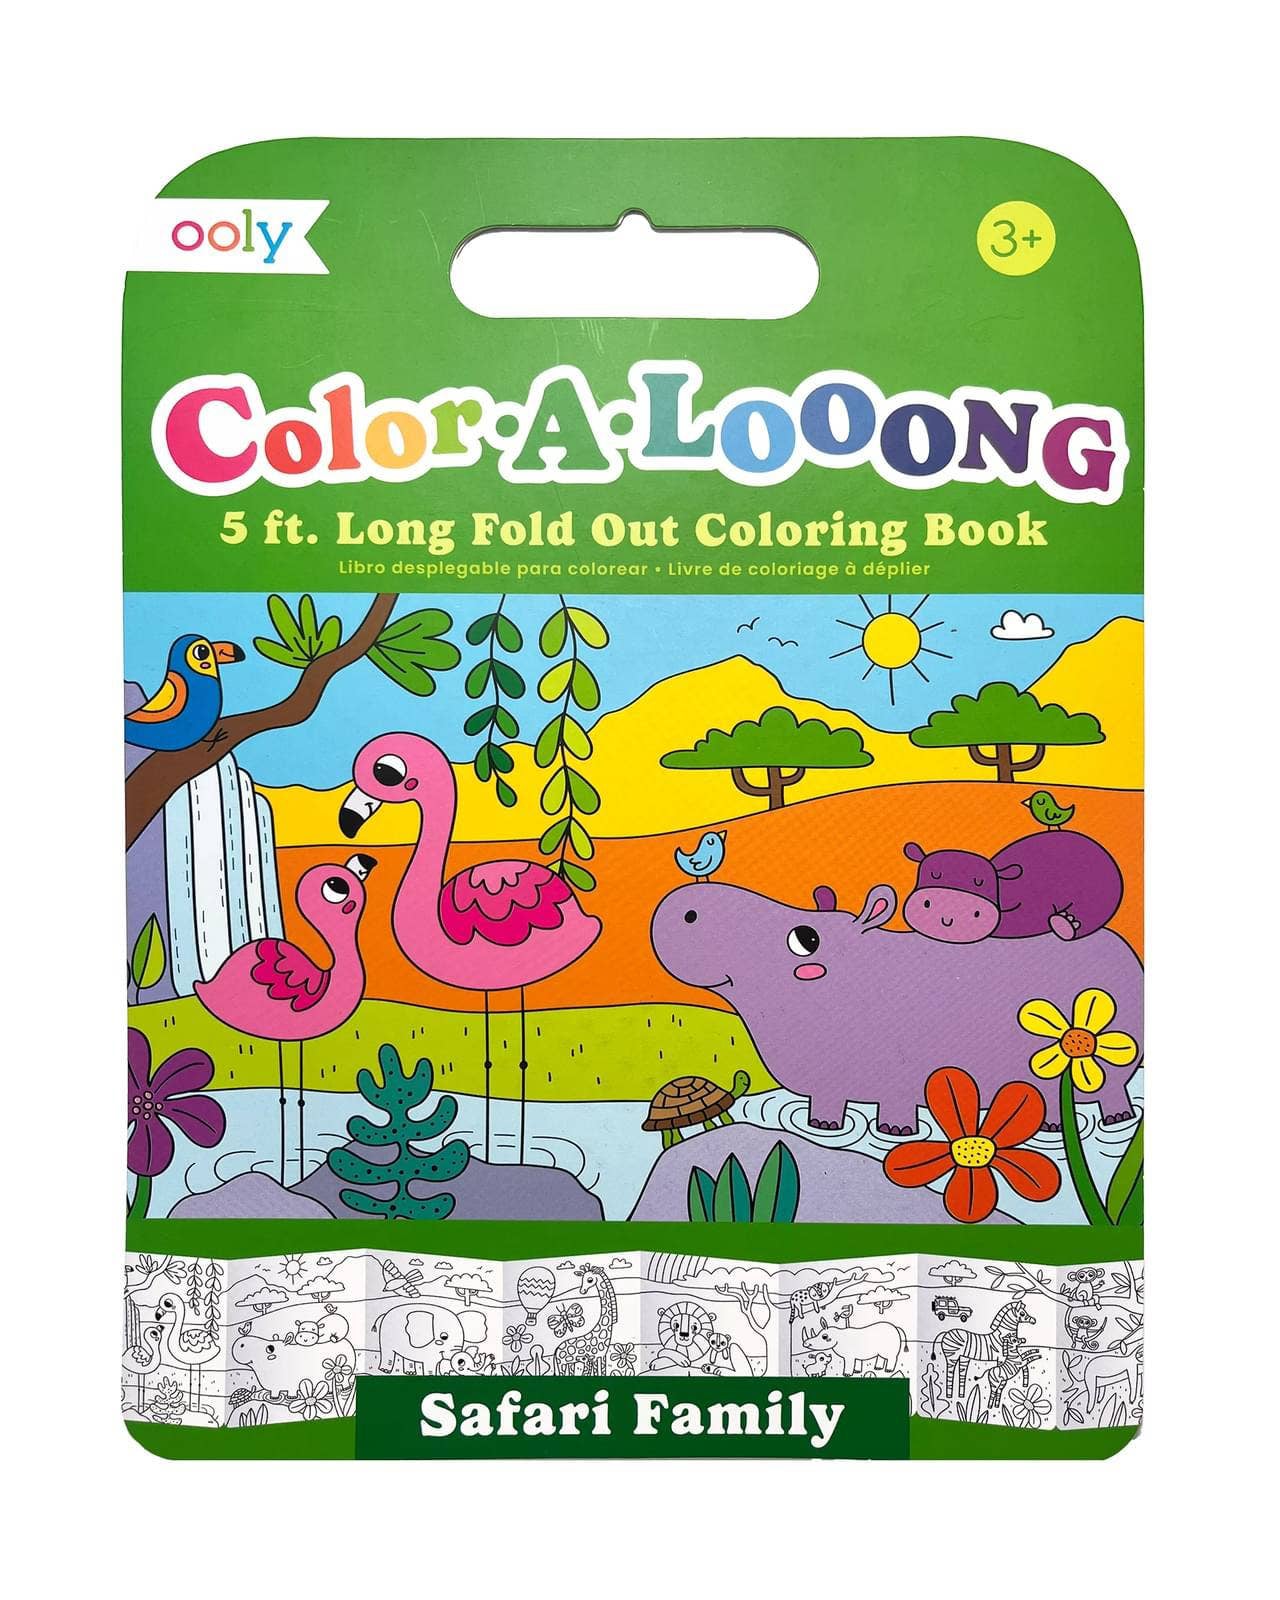 Color-A-Loong 5' Fold Out Coloring Book - Safari Family